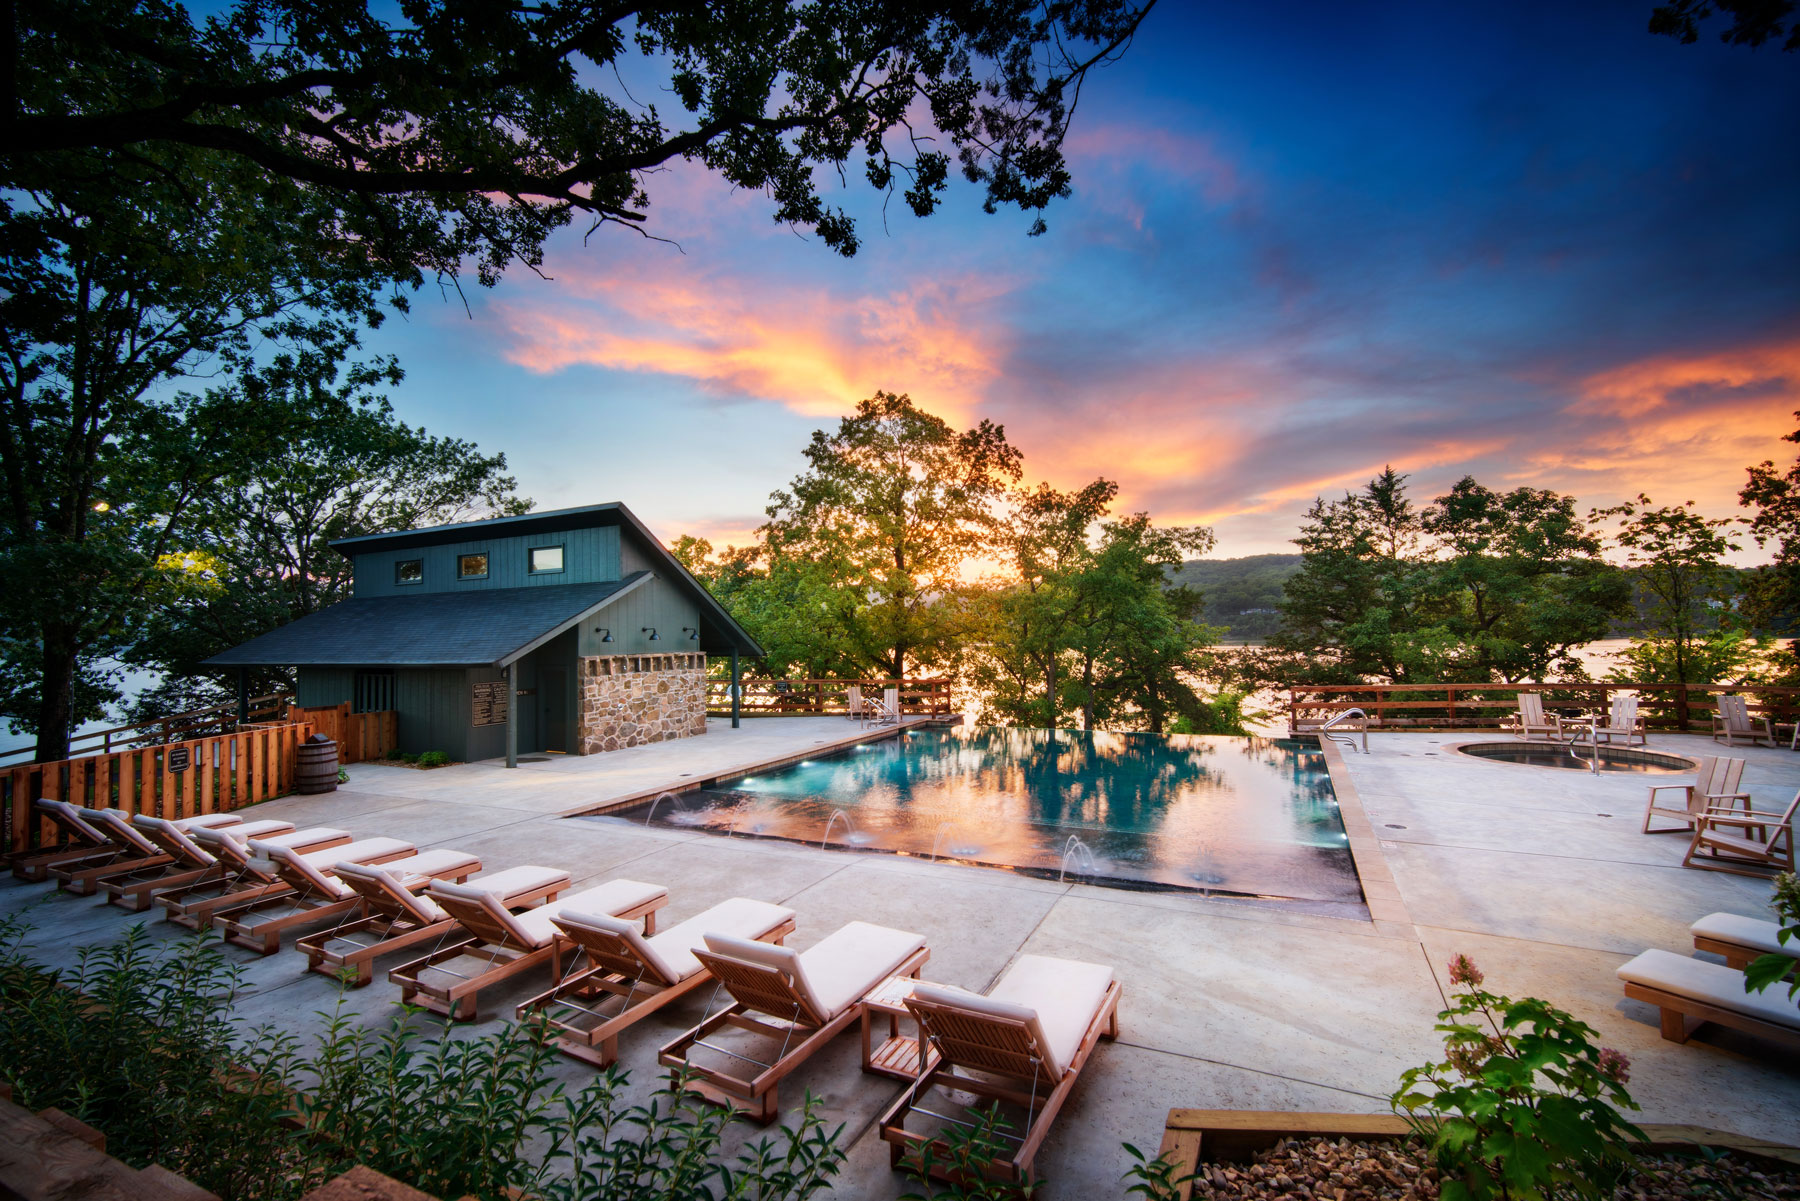 Camp Long Creek swimming pool lined with reclining chairs, vivid sunset and lake in the background